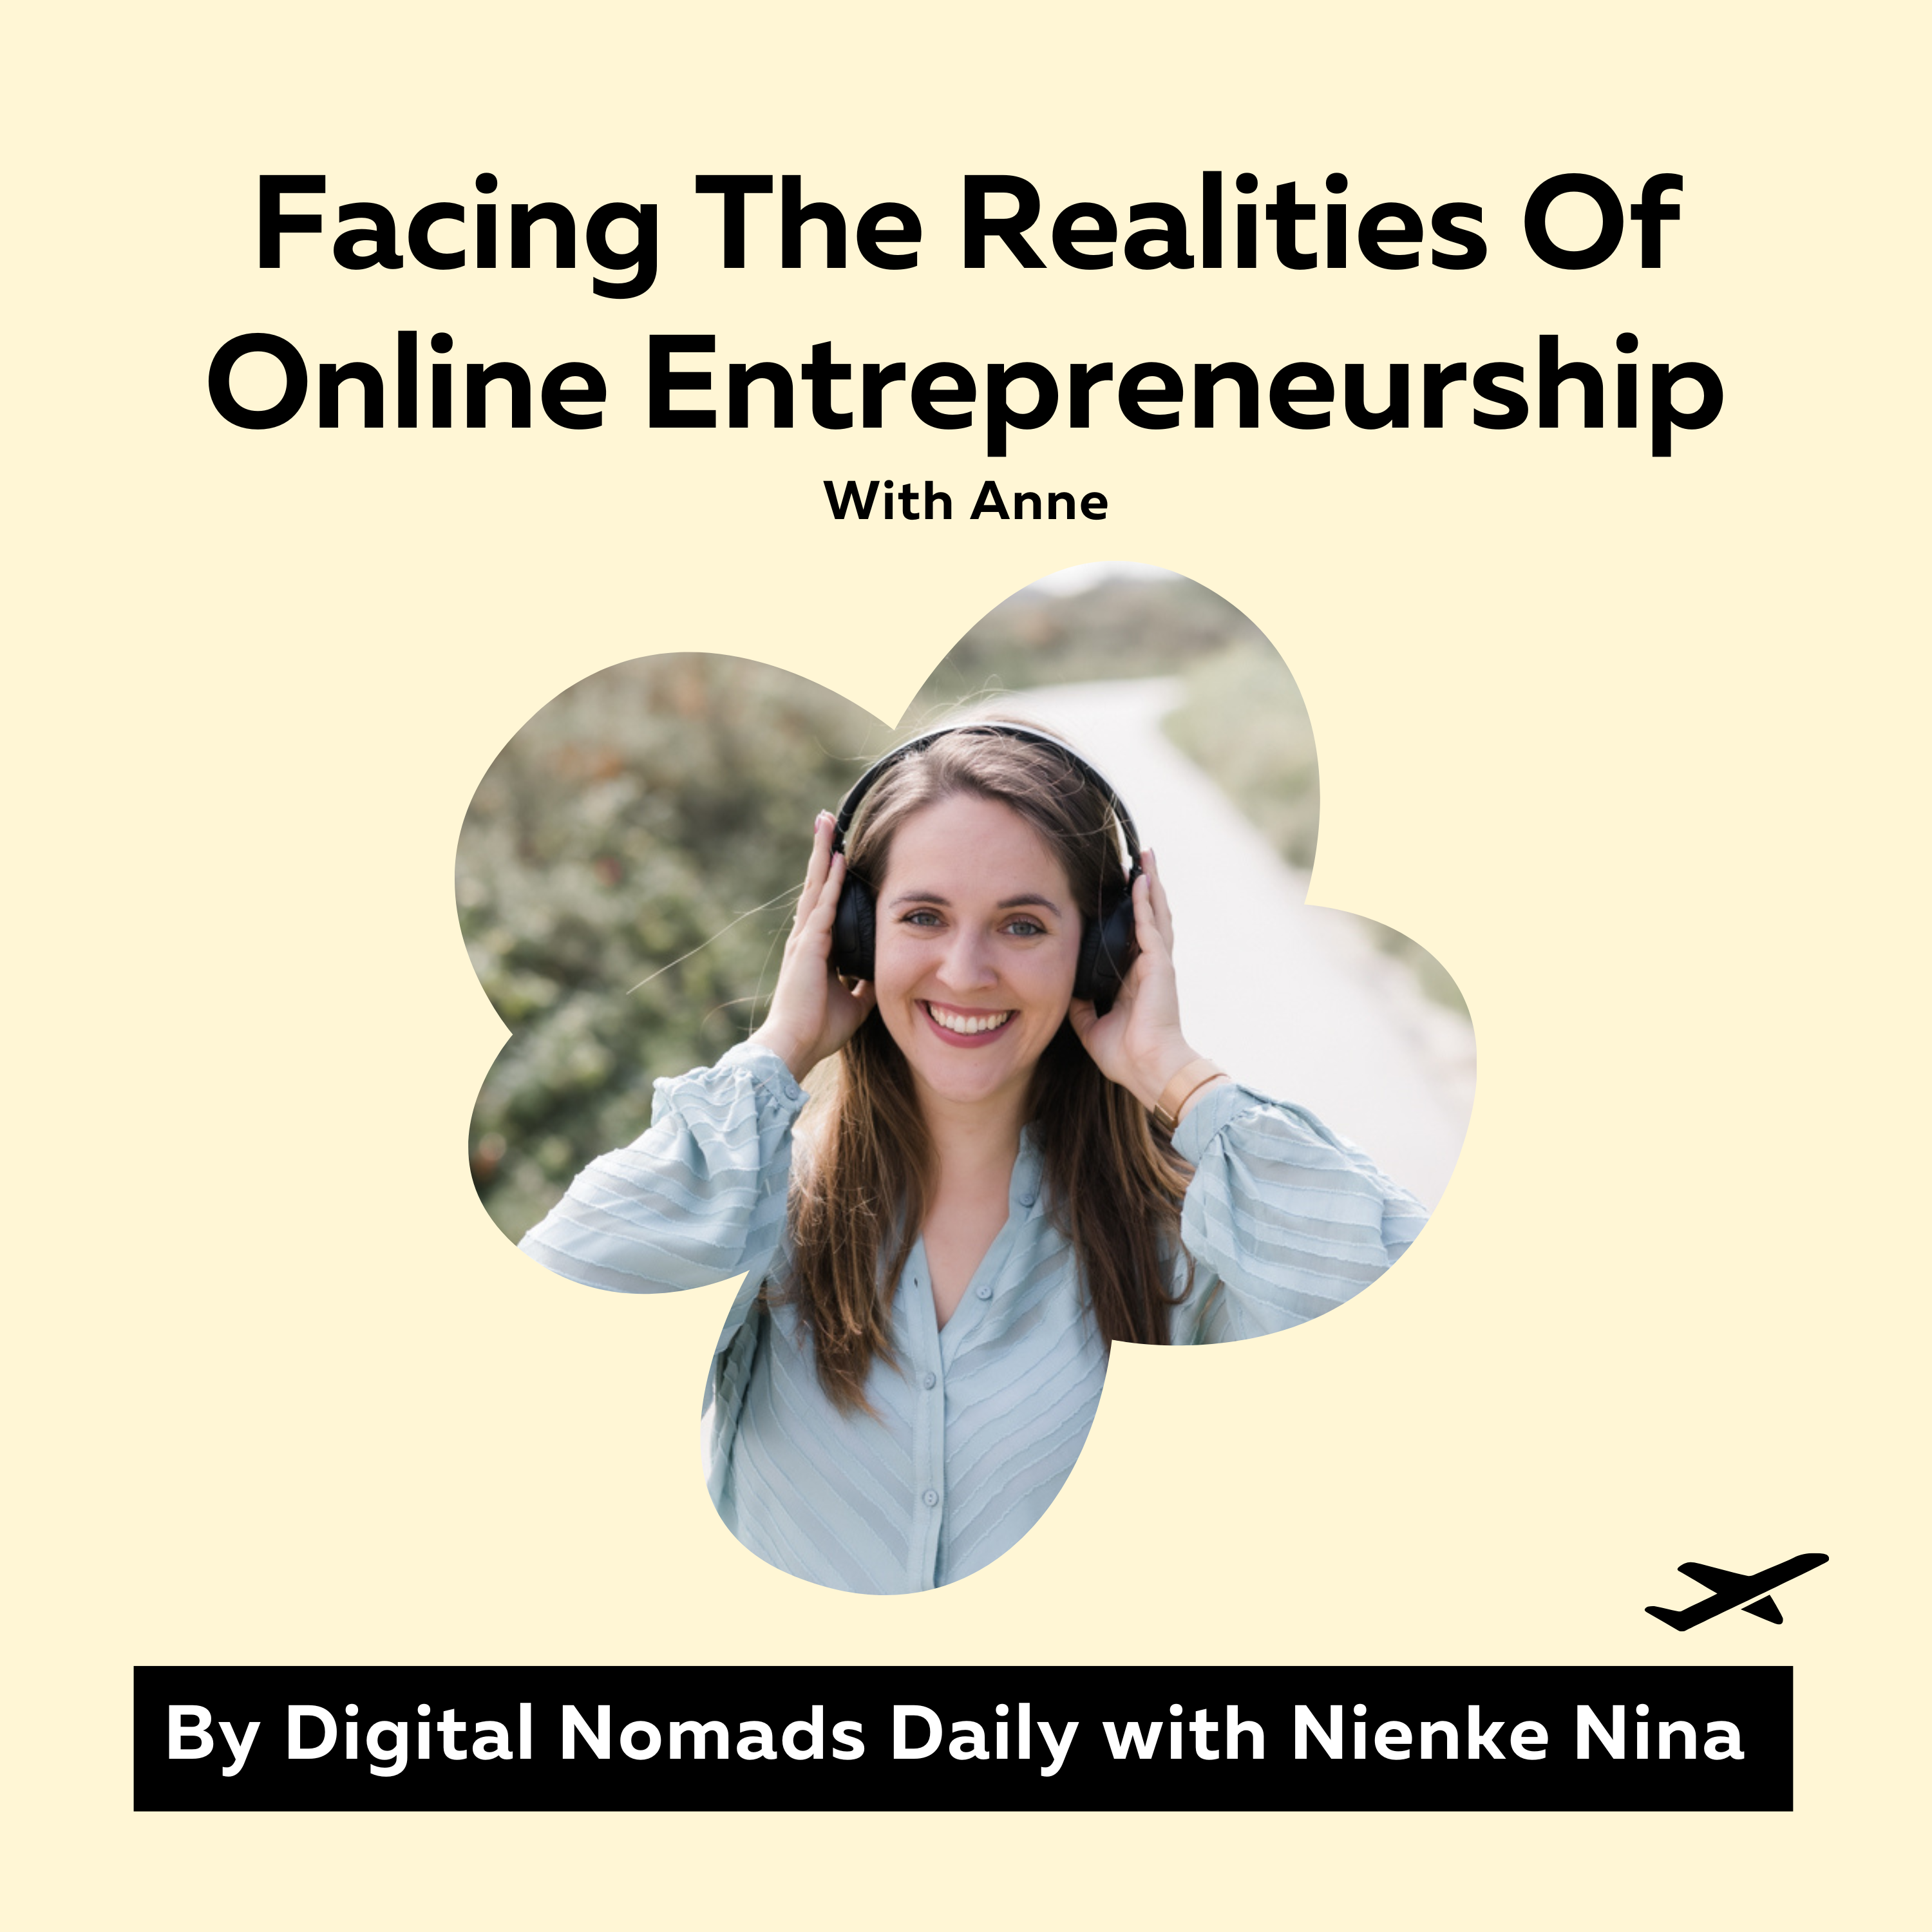 Digital Nomads Daily Podcast Cover Facing The Realities Of Online Entrepreneurship with Anne